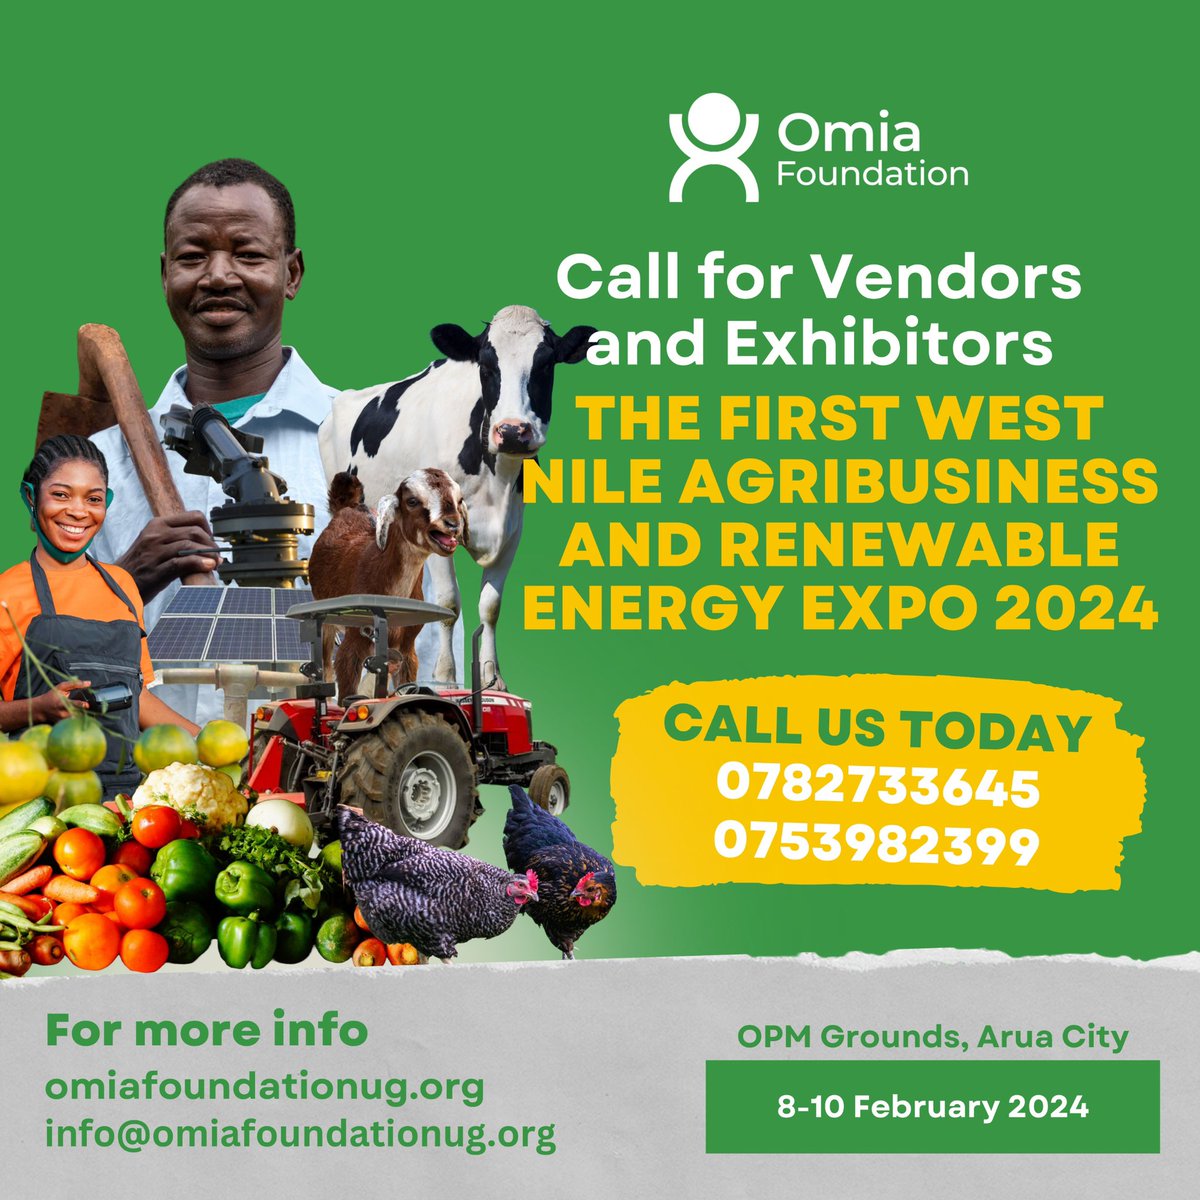 3 exciting days of networking, learning and fun! @omiafoundation1 @OmiaLtd @omiafoods